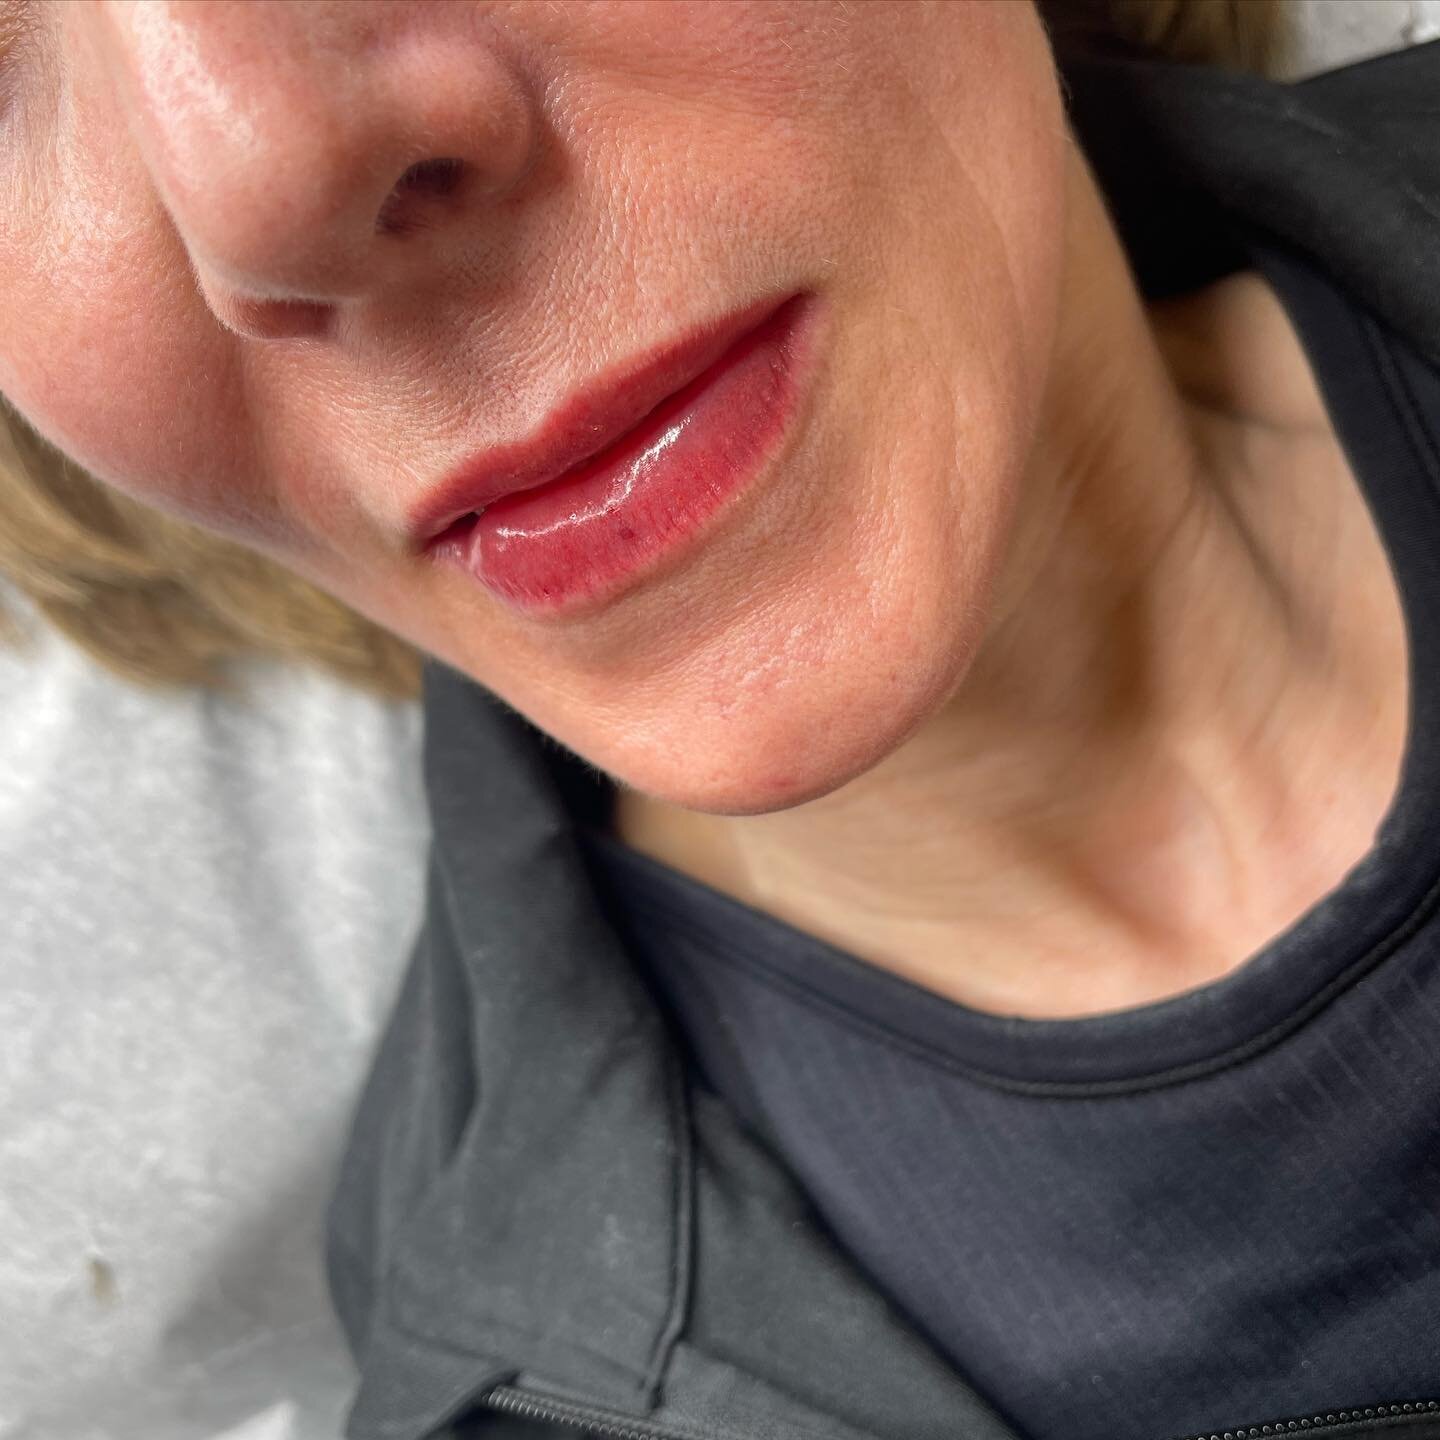 Soft Contour Lip Blush can give the appearance of more voluminous, symmetrical lips. Subtle and natural enhancement to restore and rejuvenate your smile. Scroll to see this transformation! 

💋 Soft Contour Lip Blush by Erin @contour.and.ink | BEVERL